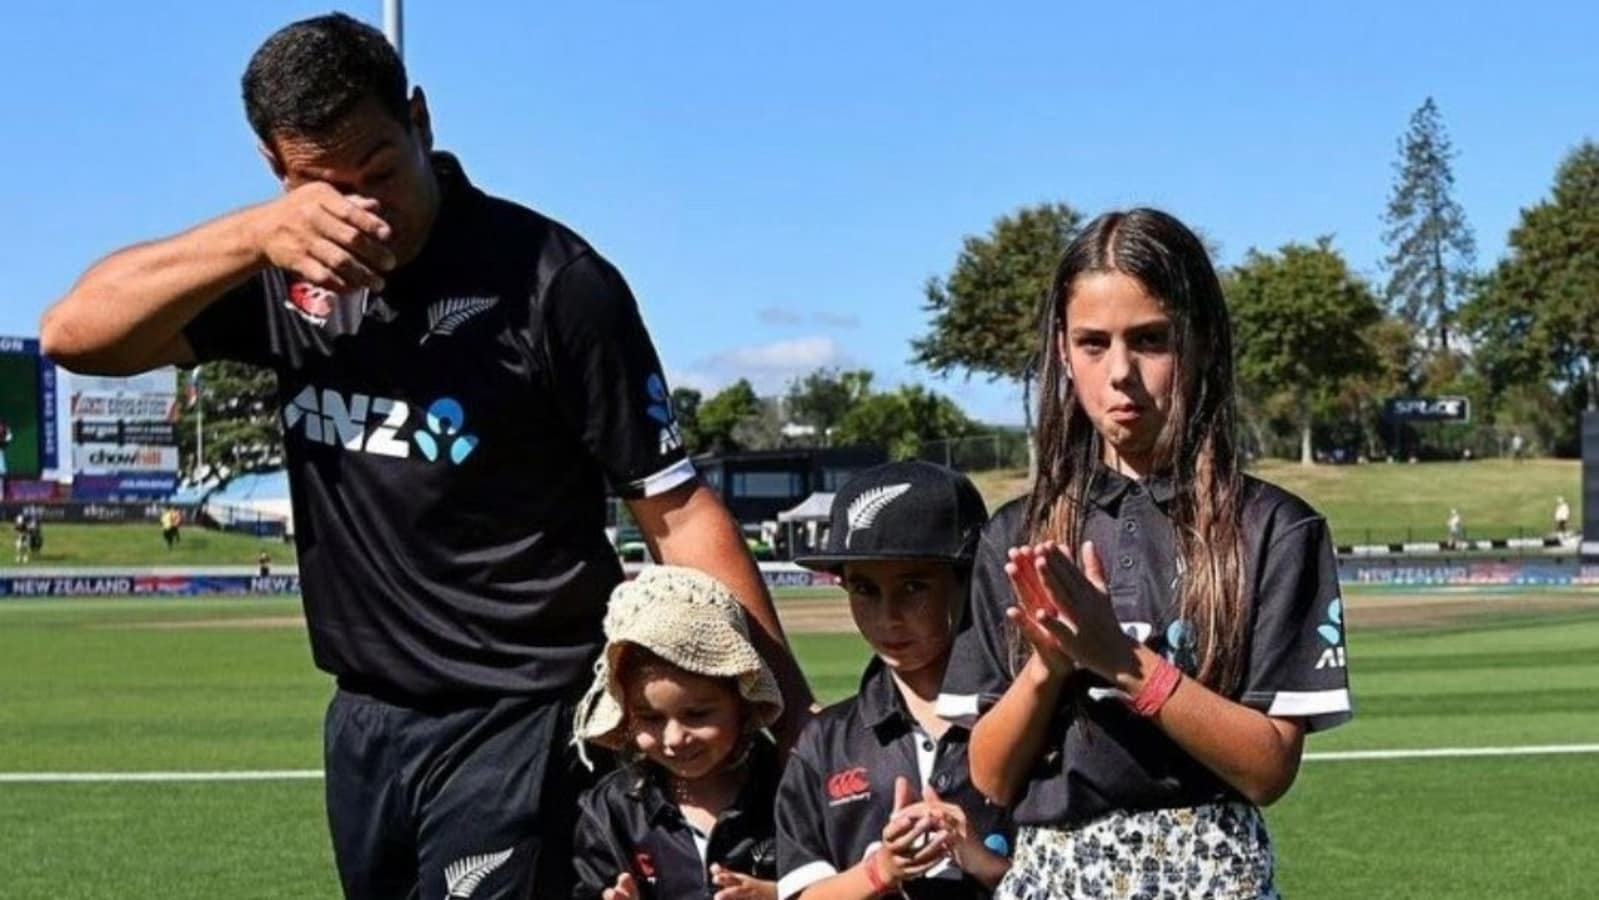 WATCH: Ross Taylor bids emotional goodbye to cricket, receives guard of honour; Kohli, Dravid extend wishes